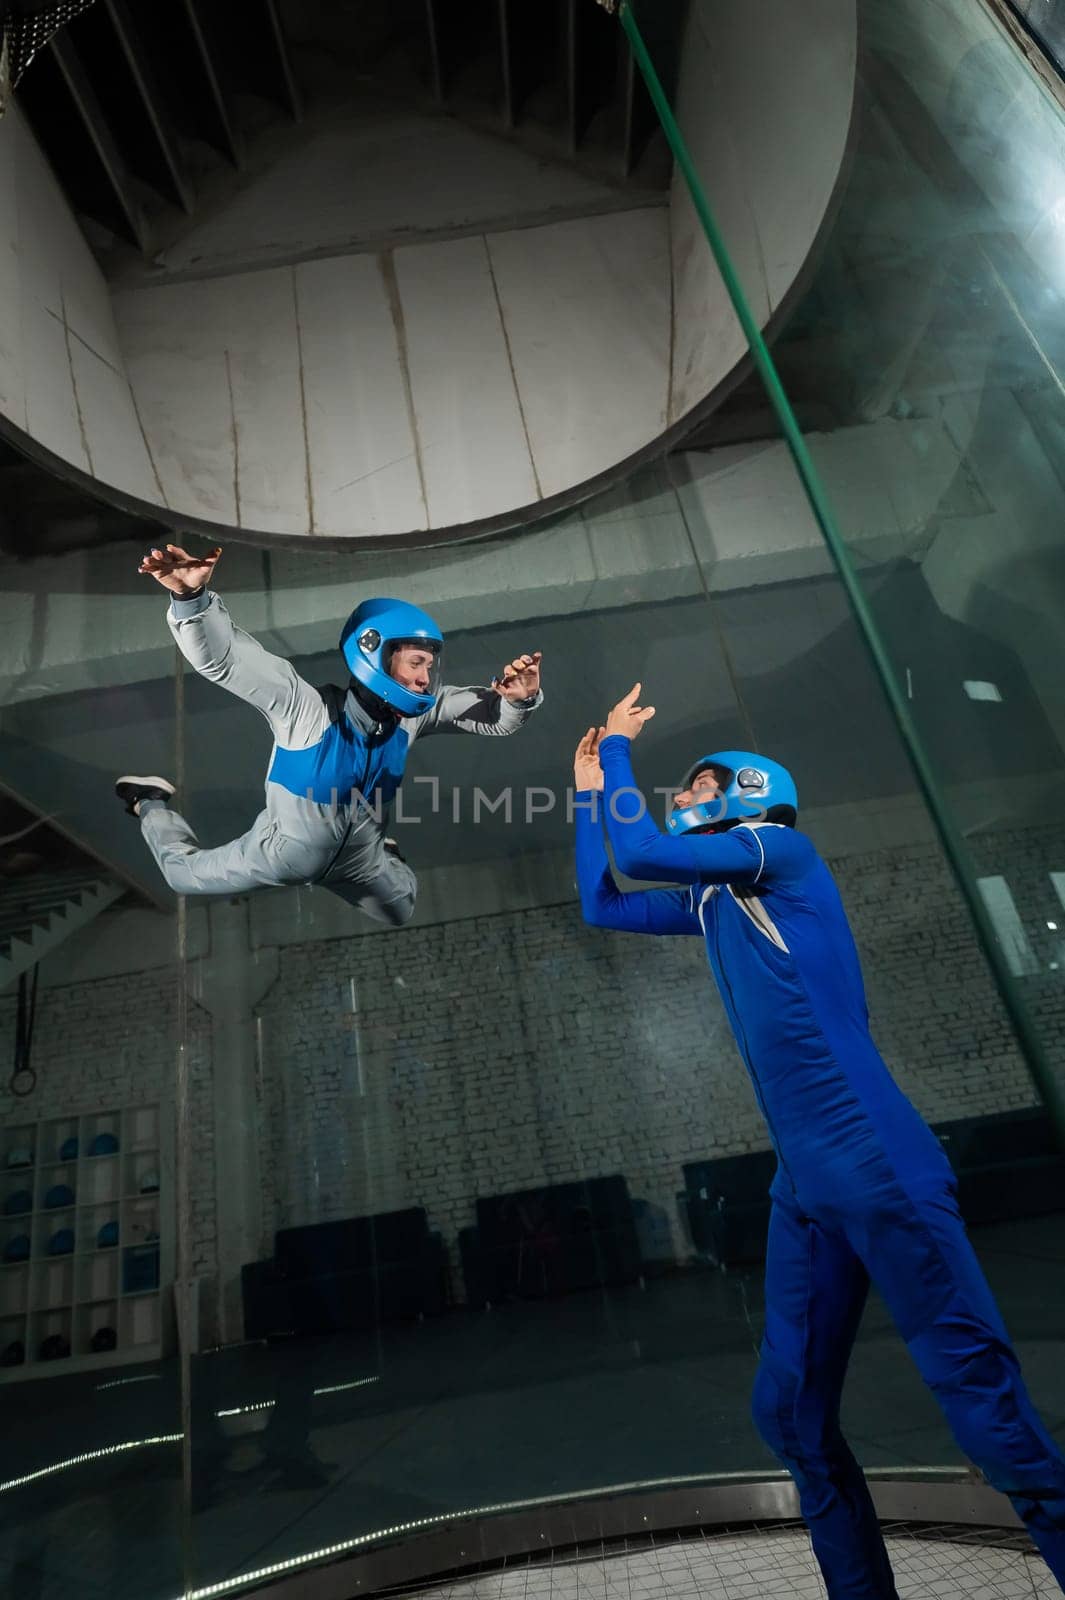 A male instructor teaches a woman how to fly in a wind tunnel. Free fall simulator